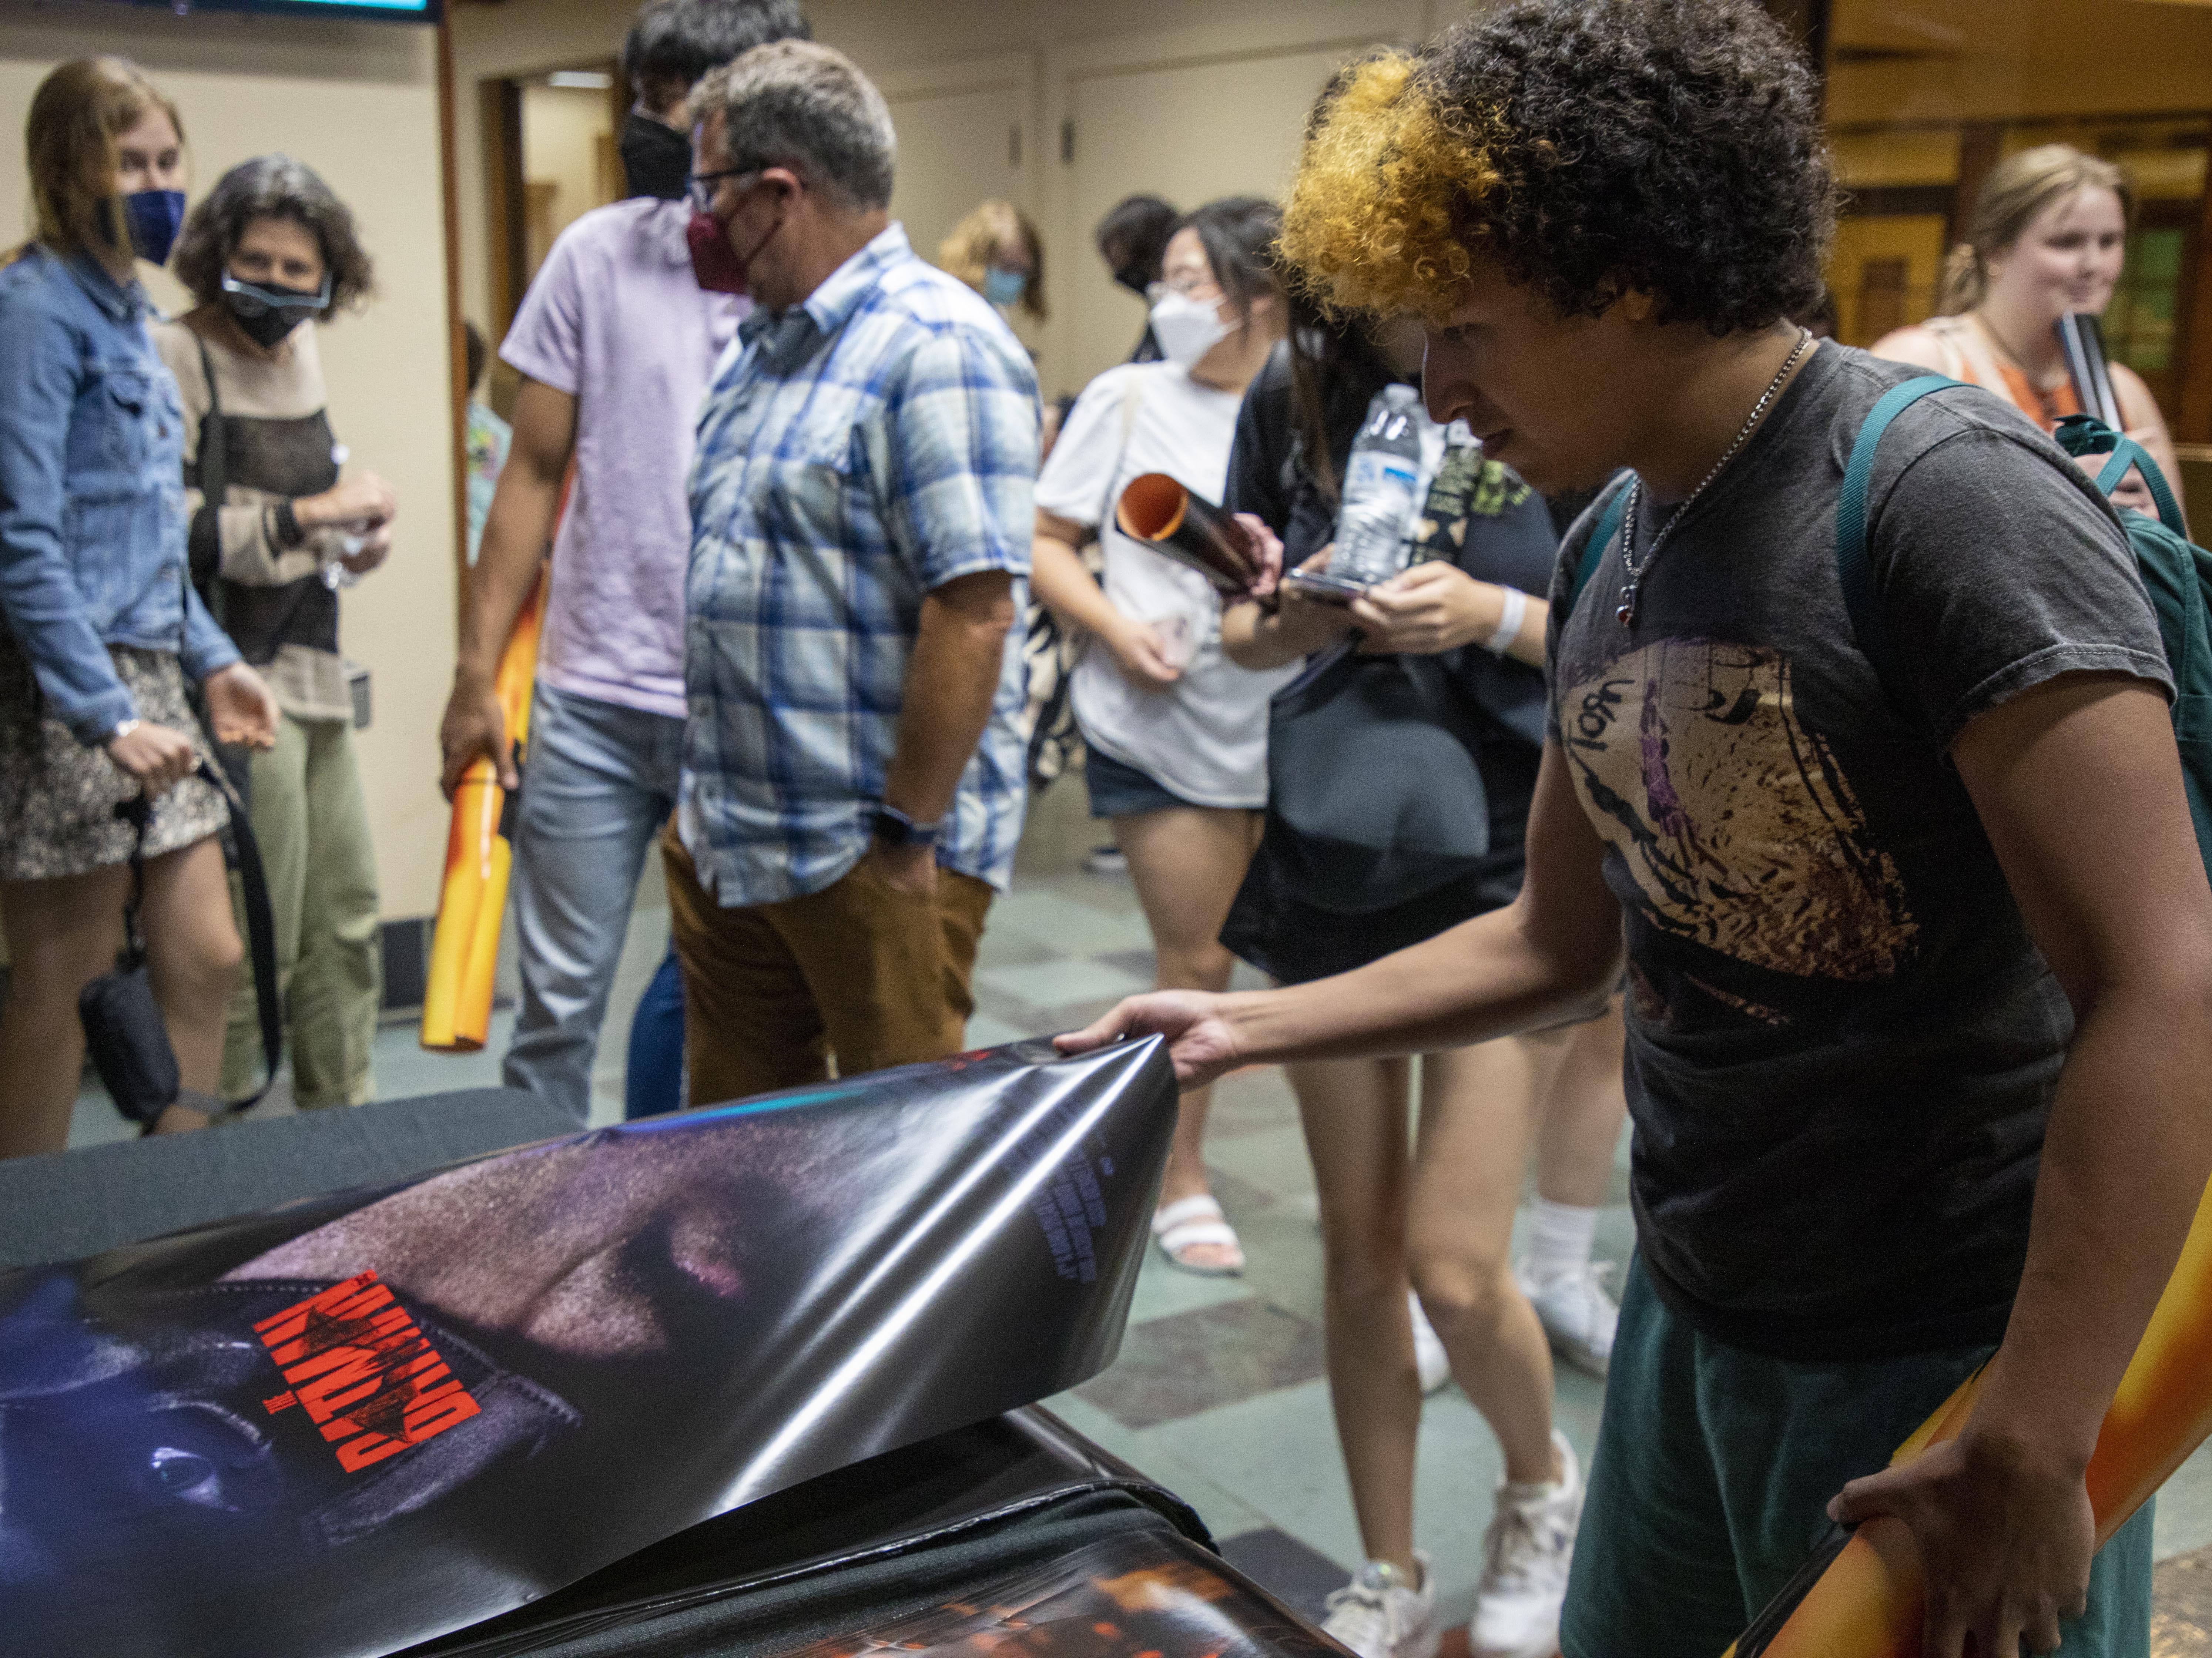 A student buys a poster at a special screening of The Batman.